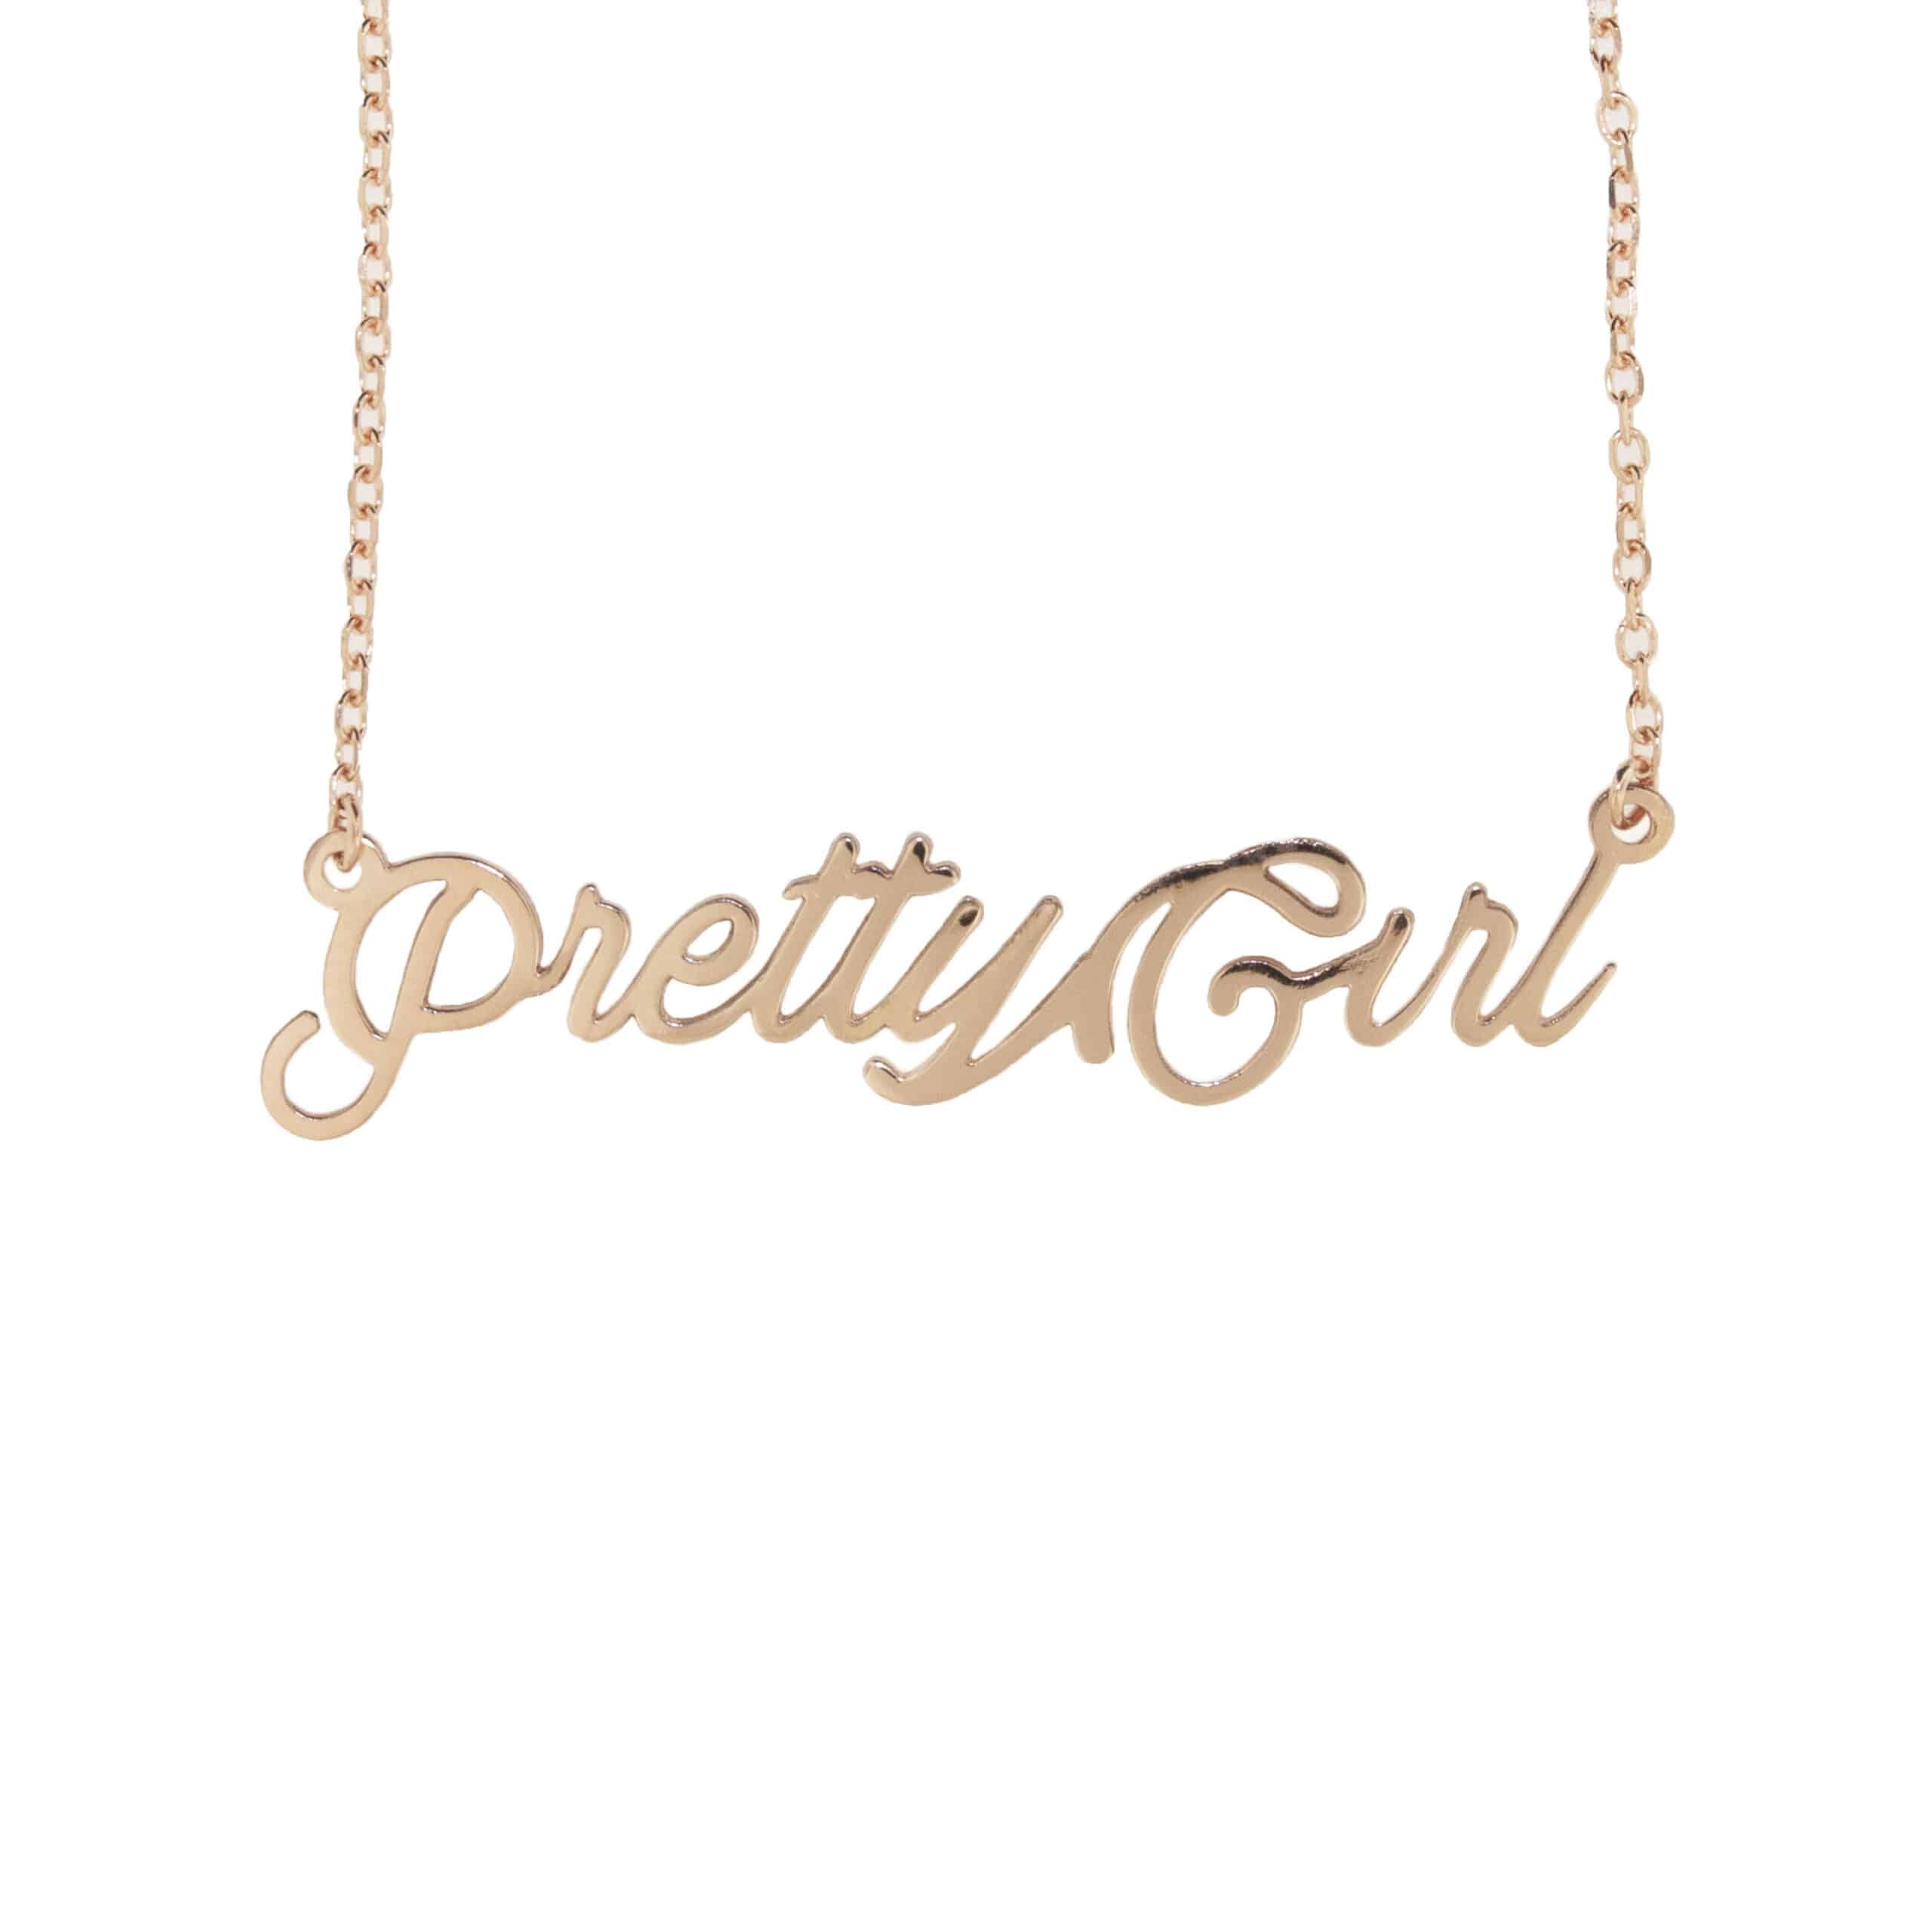 Pendant in the shape of the words "Pretty Girl"